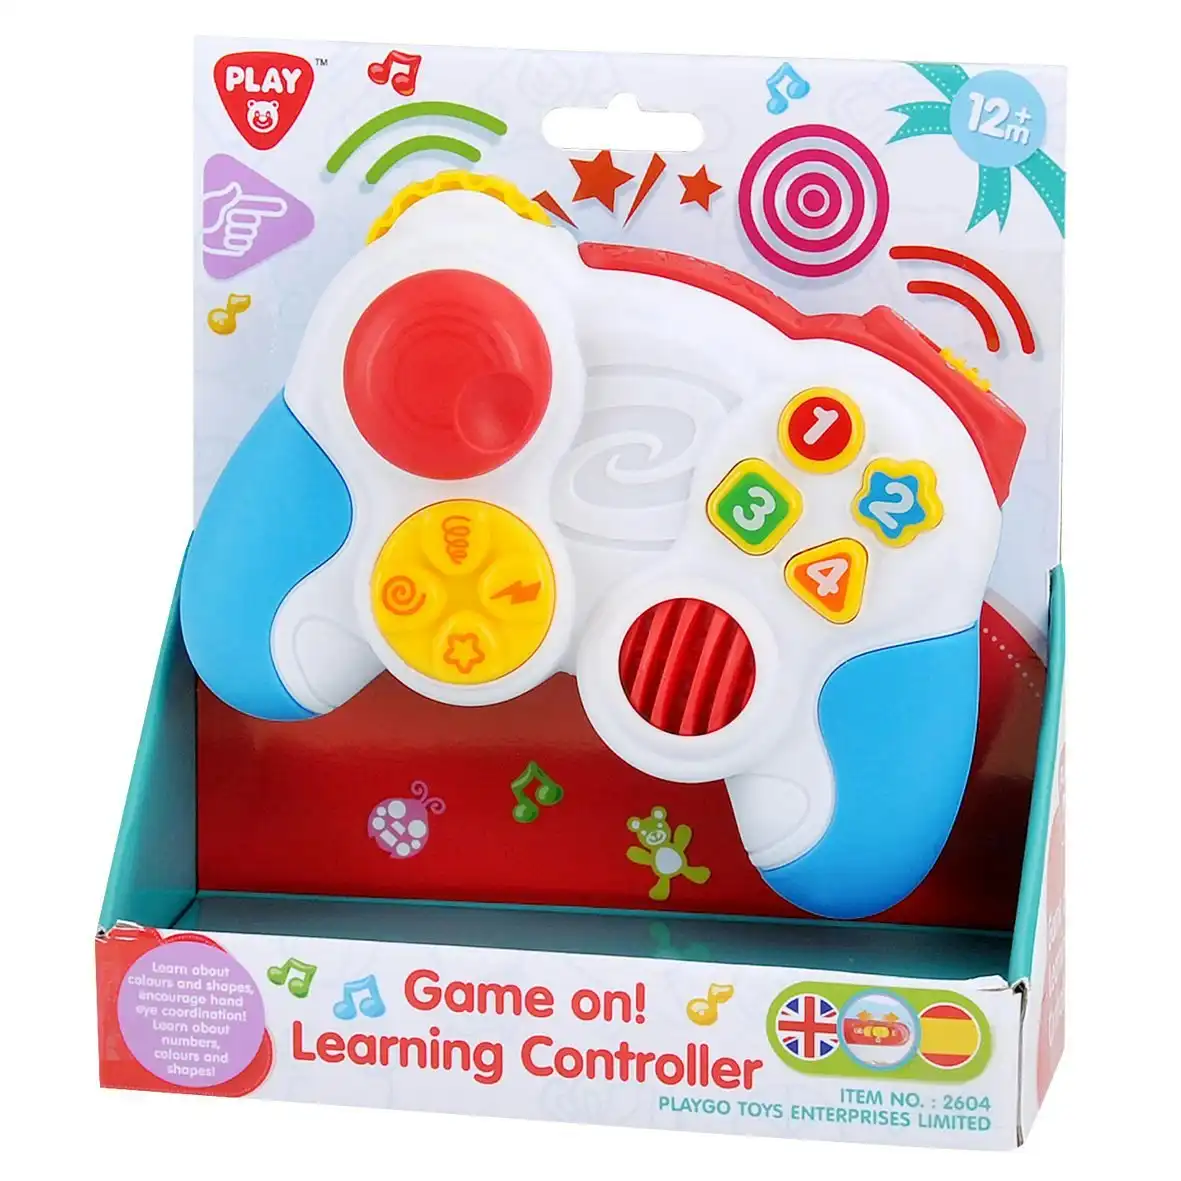 Battery Operated Game On Learning Controller  Playgo Toys Ent. Ltd